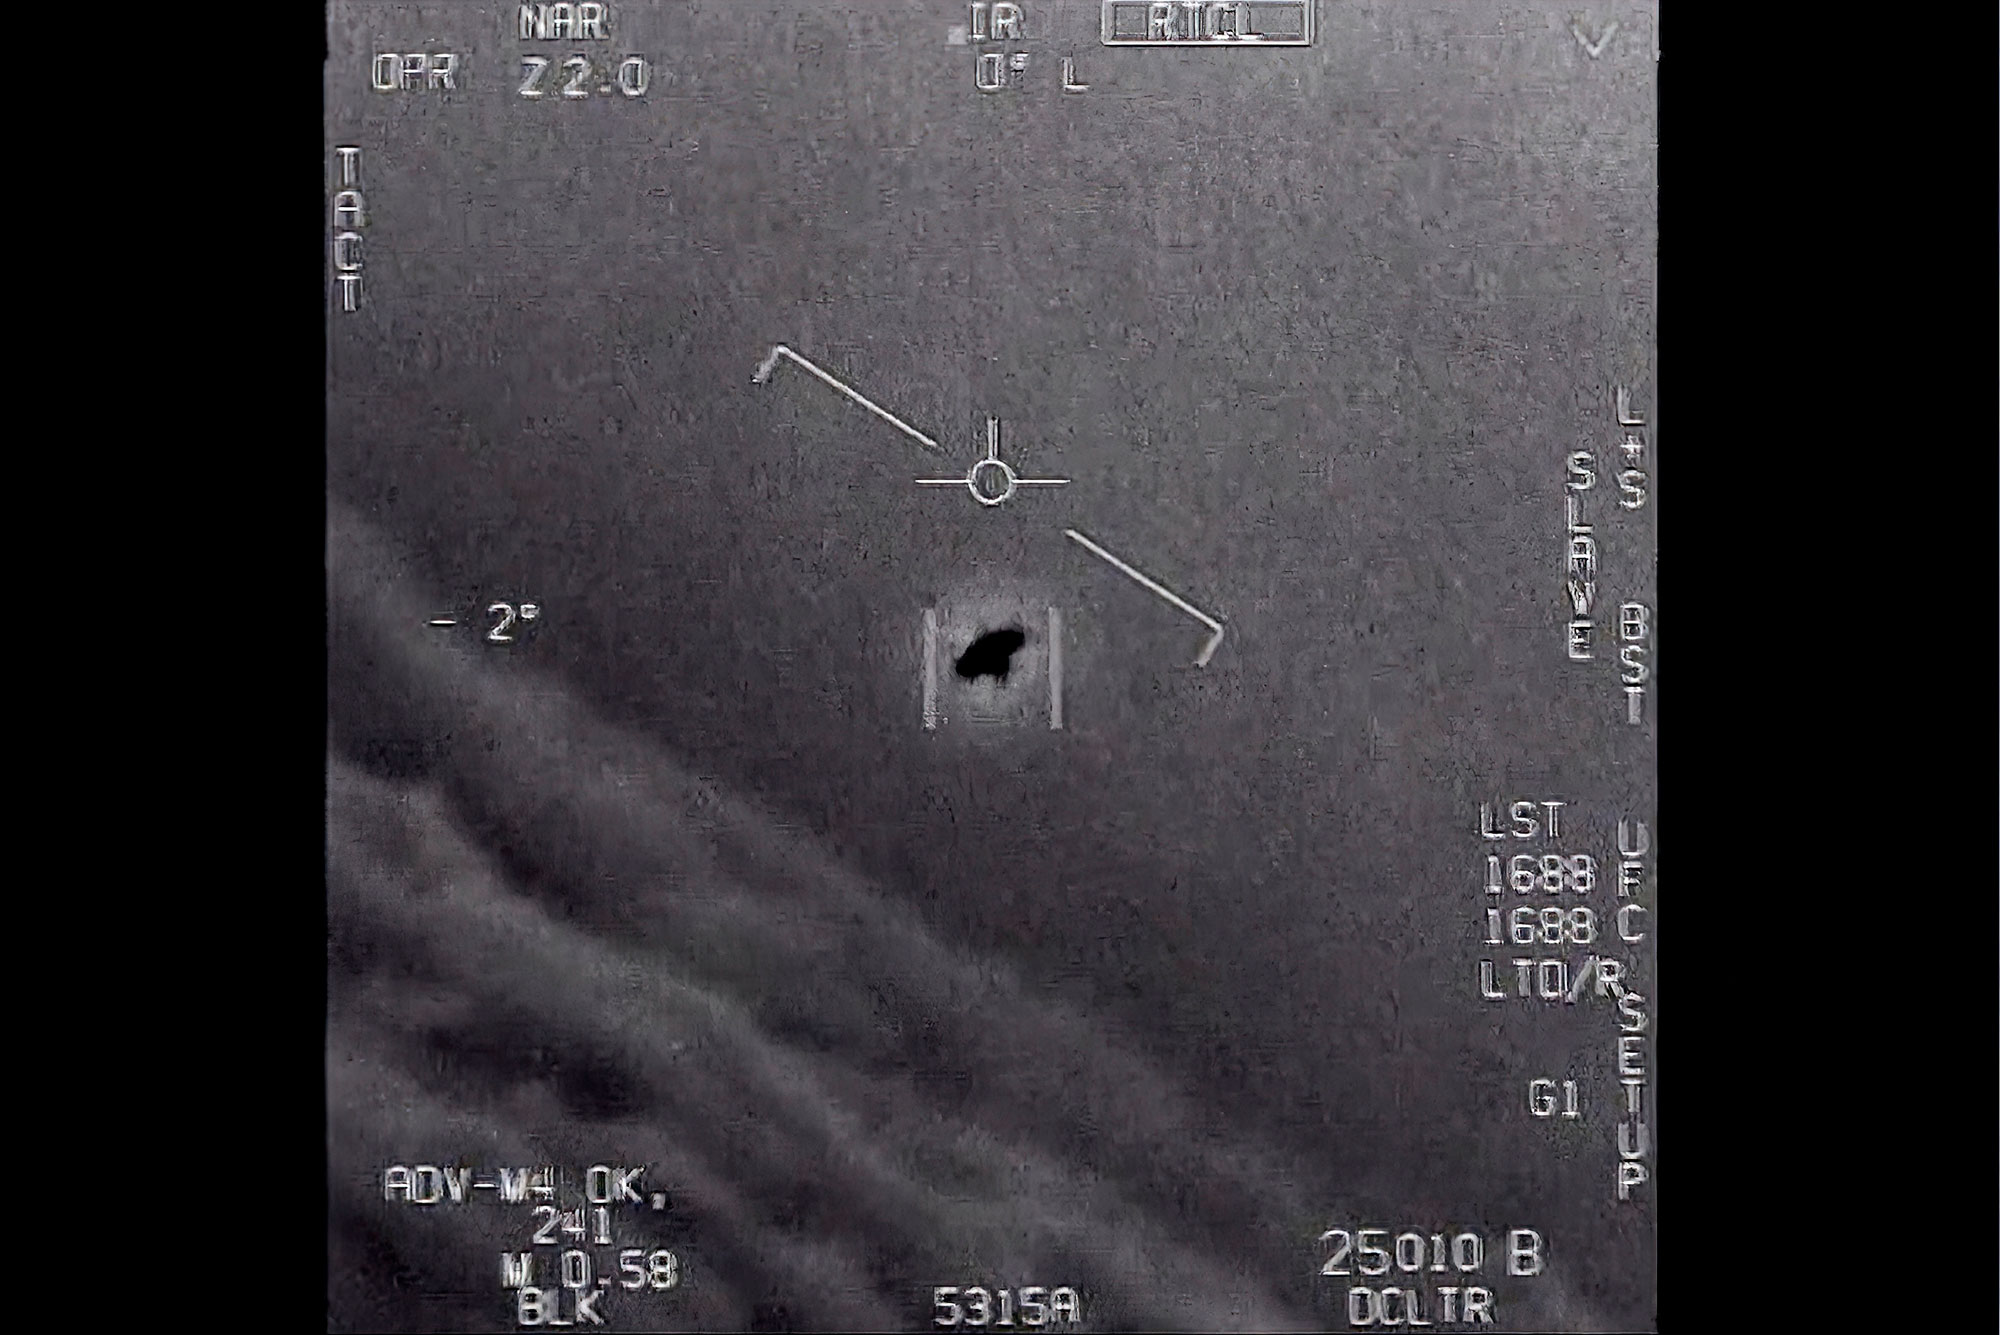 Government UFO Report Wont Rule Out Visitors from Space BU Today Boston University